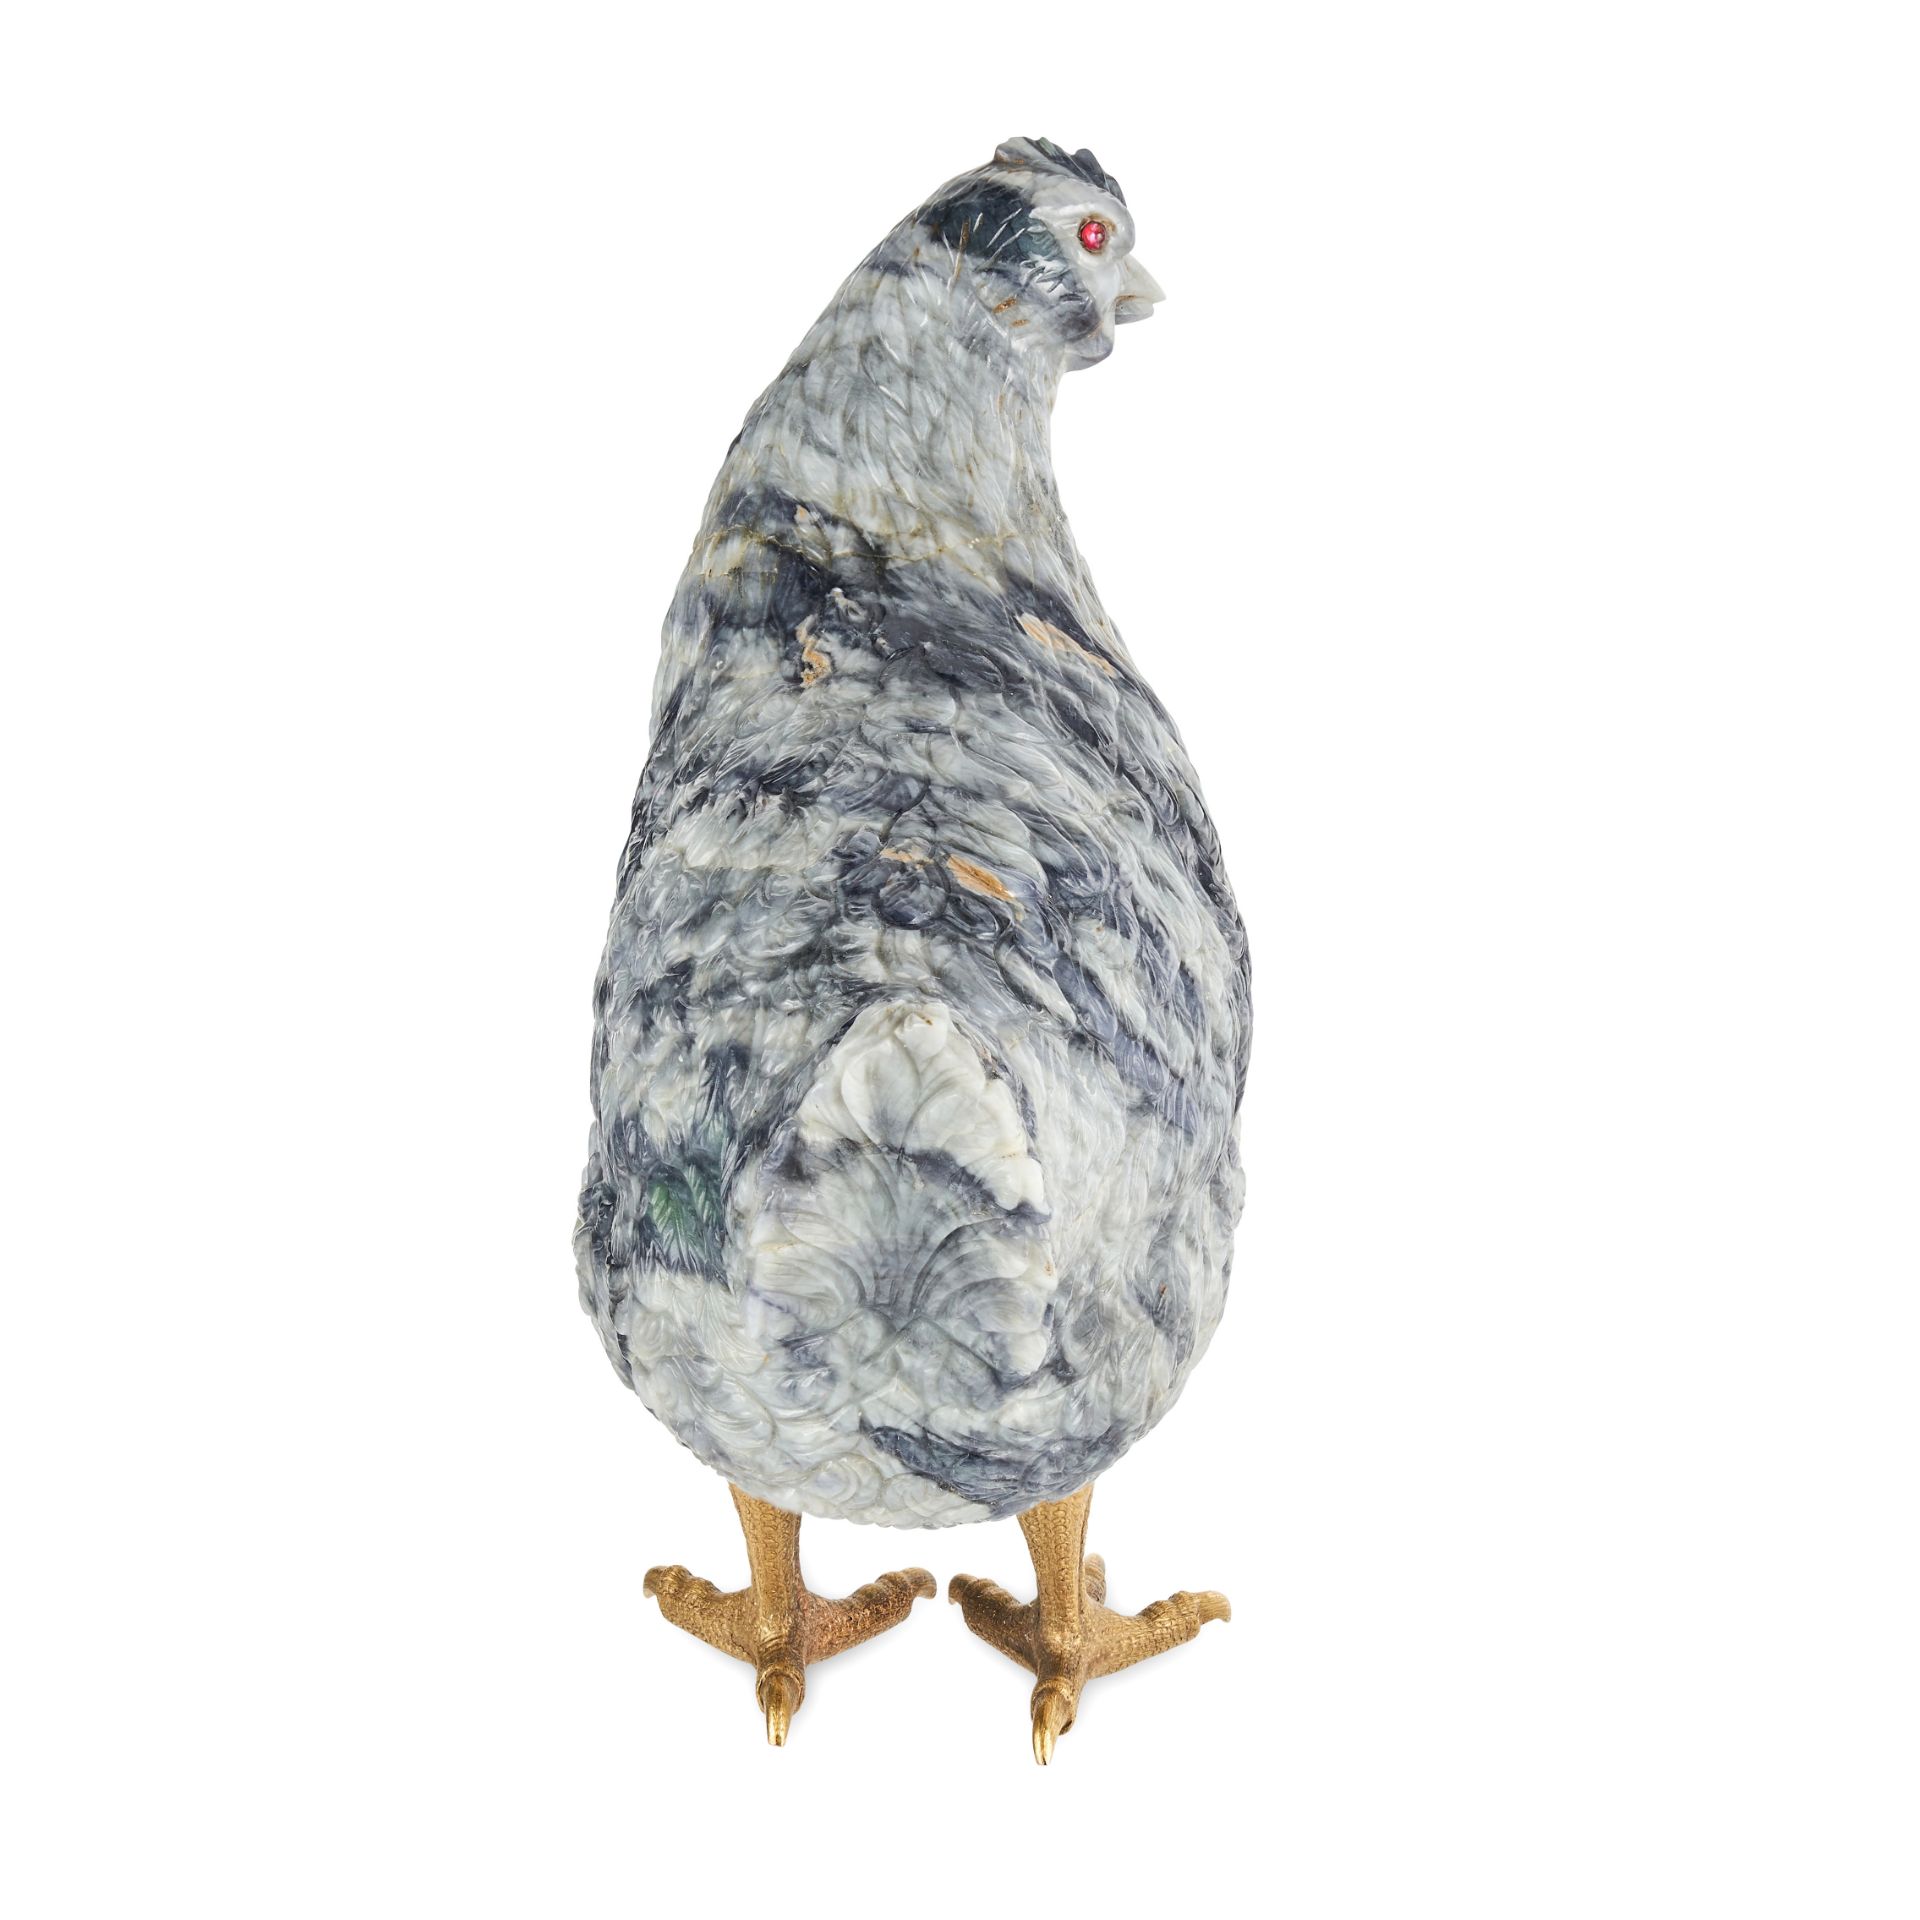 FABERGE, A RARE JEWELLED GOLD MOUNTED JASPER MODEL OF A HEN, ST PETERSBURG, CIRCA 1900 - Image 8 of 11